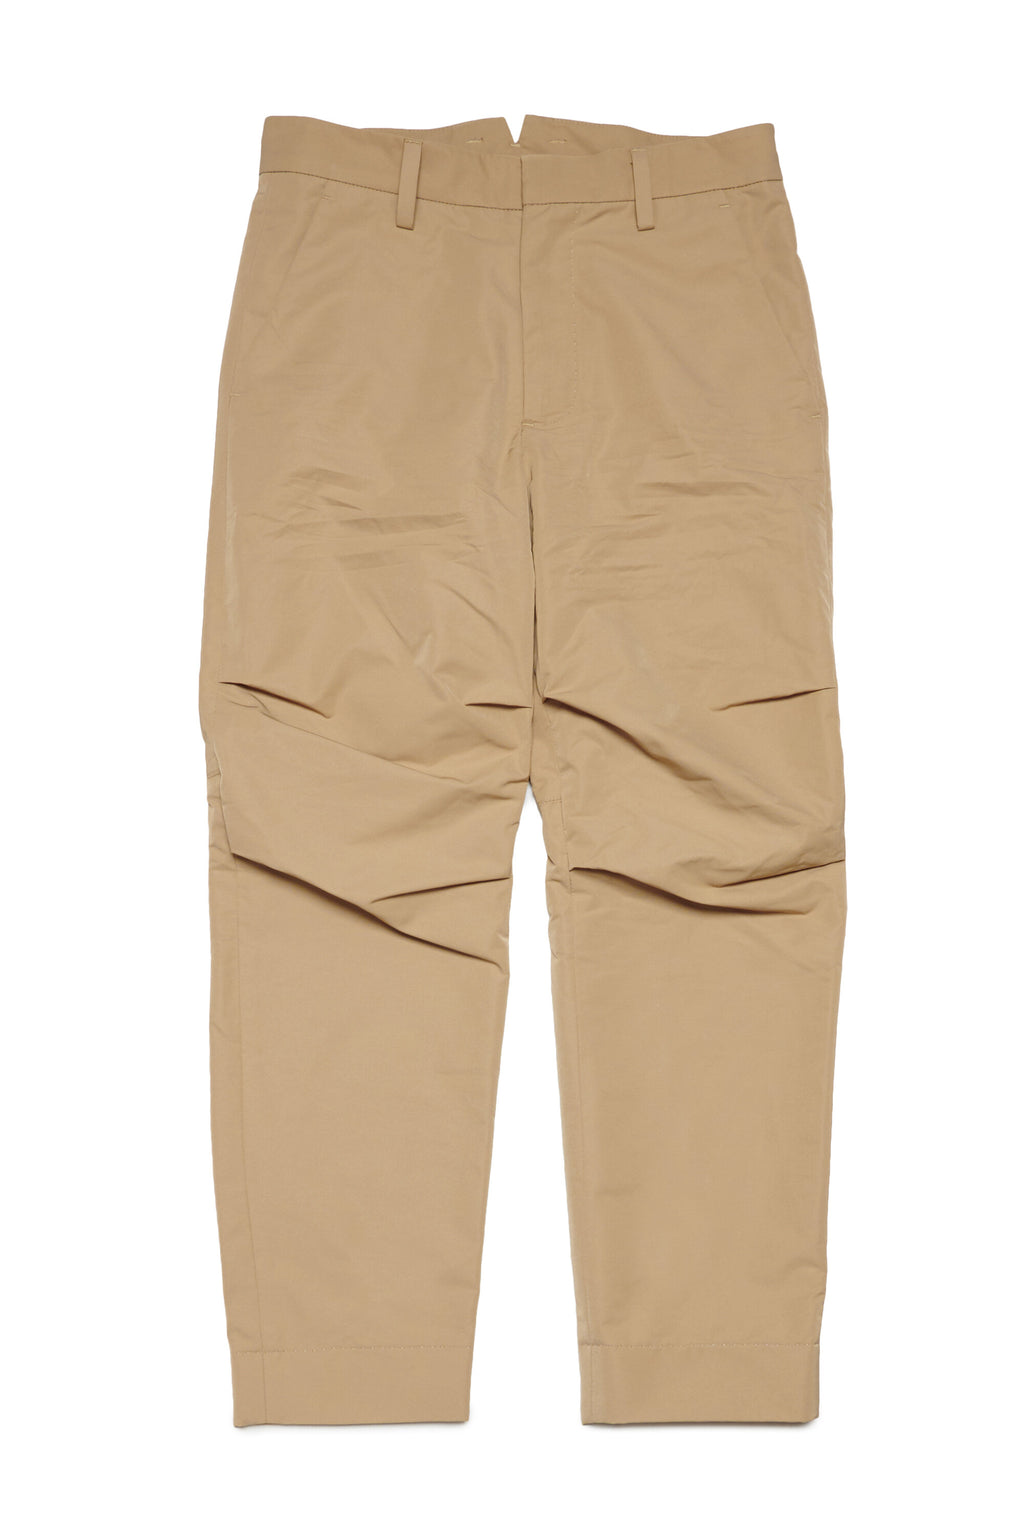 Wrinkled chino pants